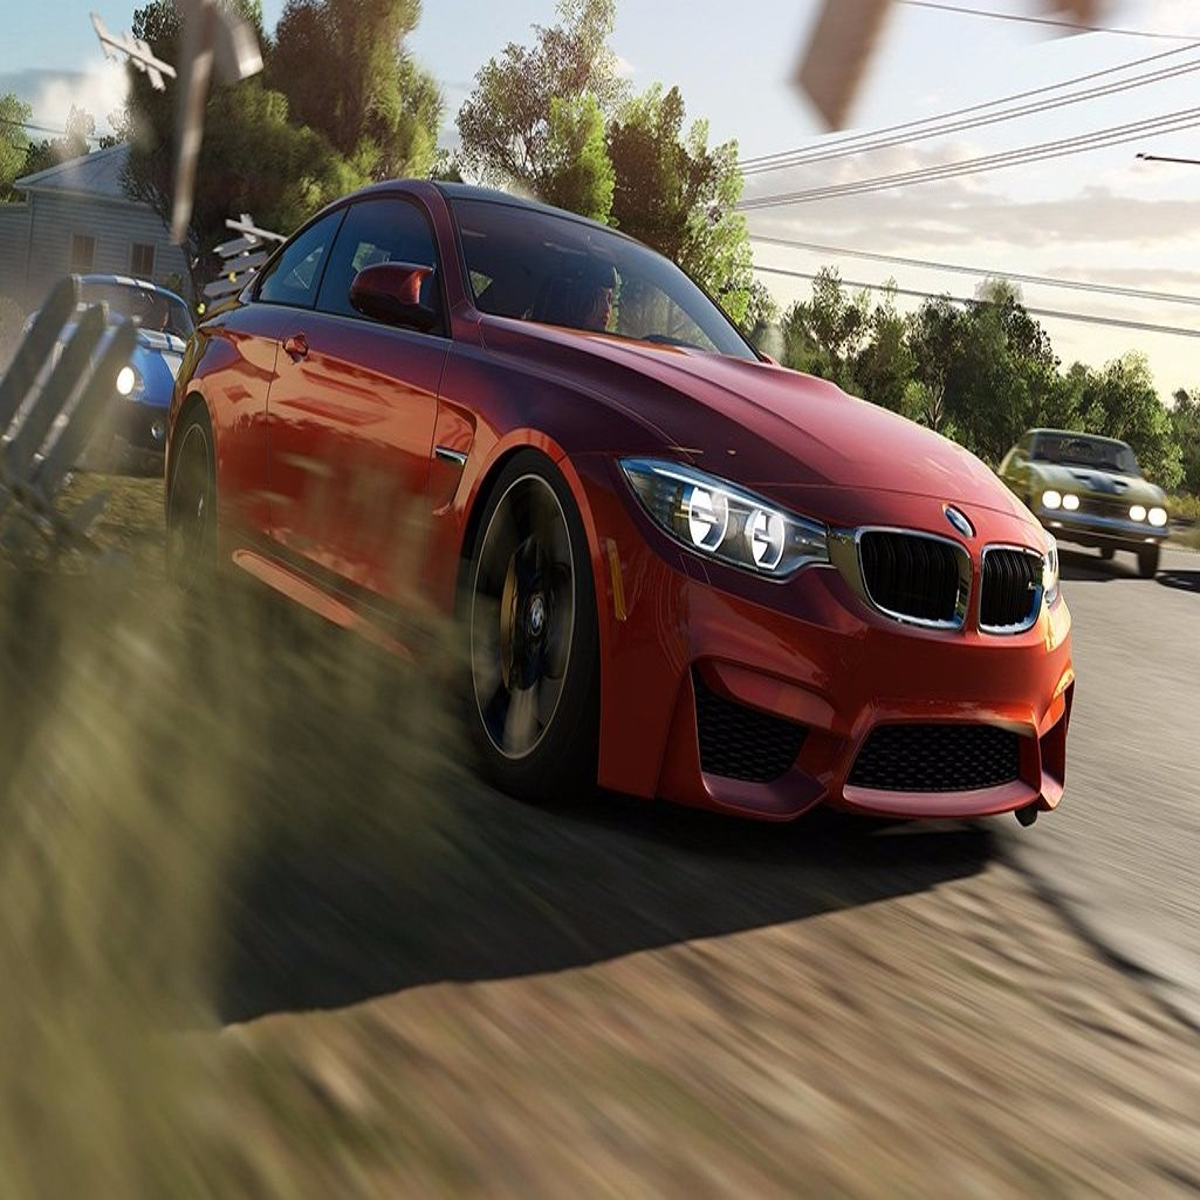 7-ish awesome new details about Forza Horizon 3 - CNET